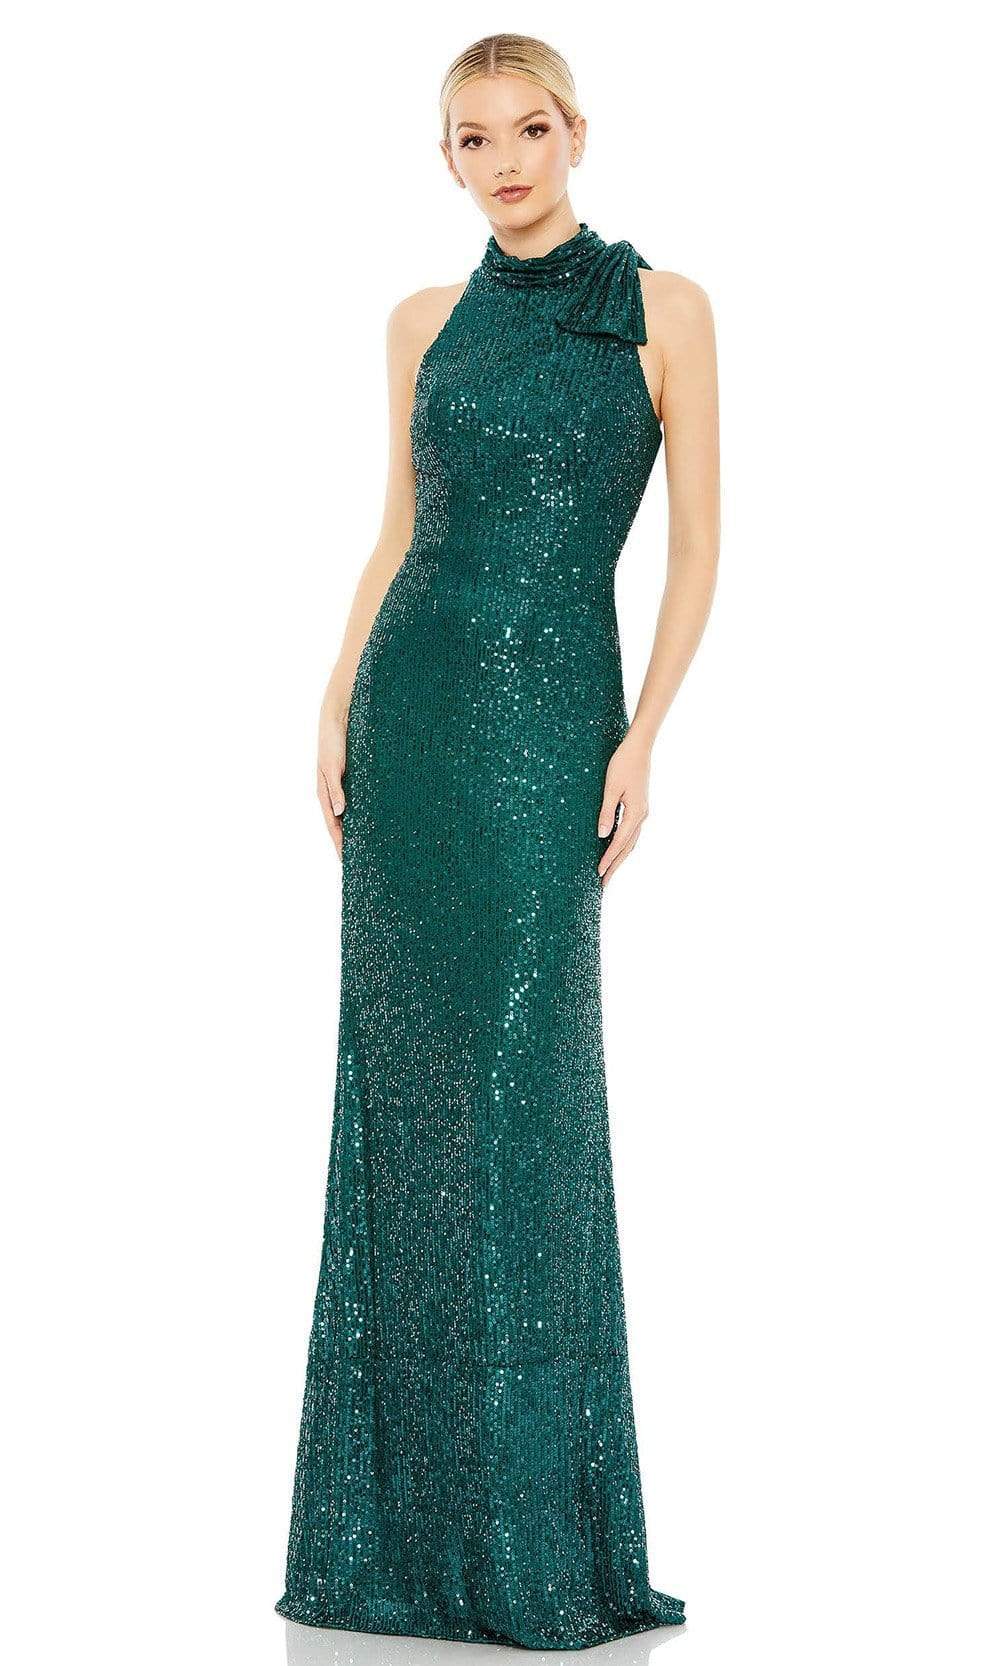 Ieena Duggal - 11280 Sequin Bow Accent Halter Gown Special Occasion Dress 0 / Teal